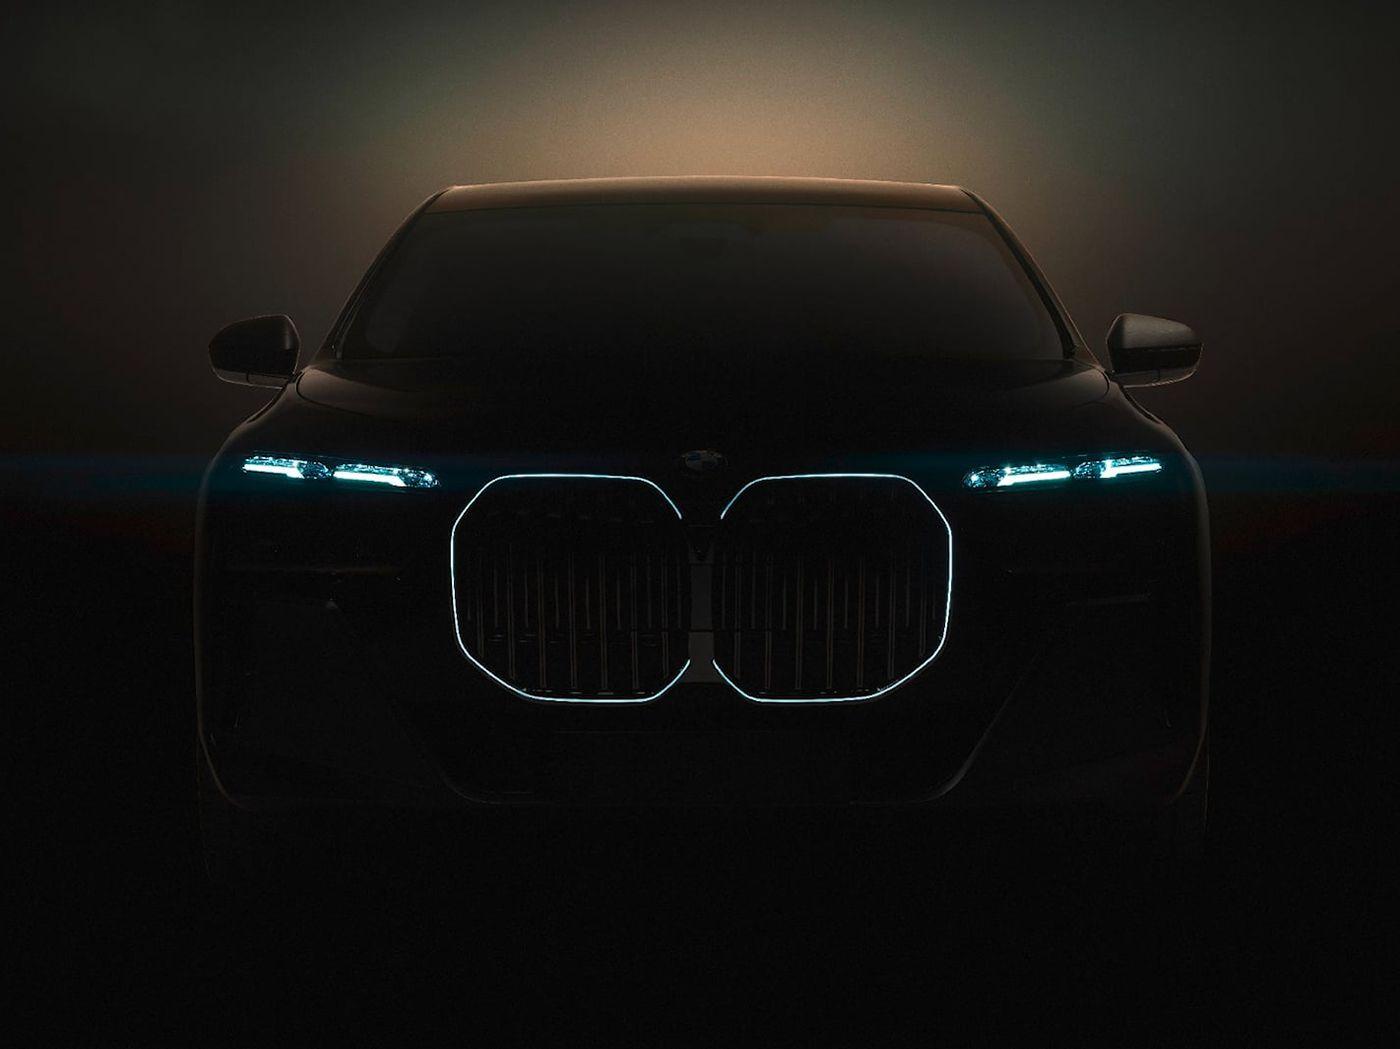 Bmw Teases The Uping I7 Electric Sedan And Its Massive Grille